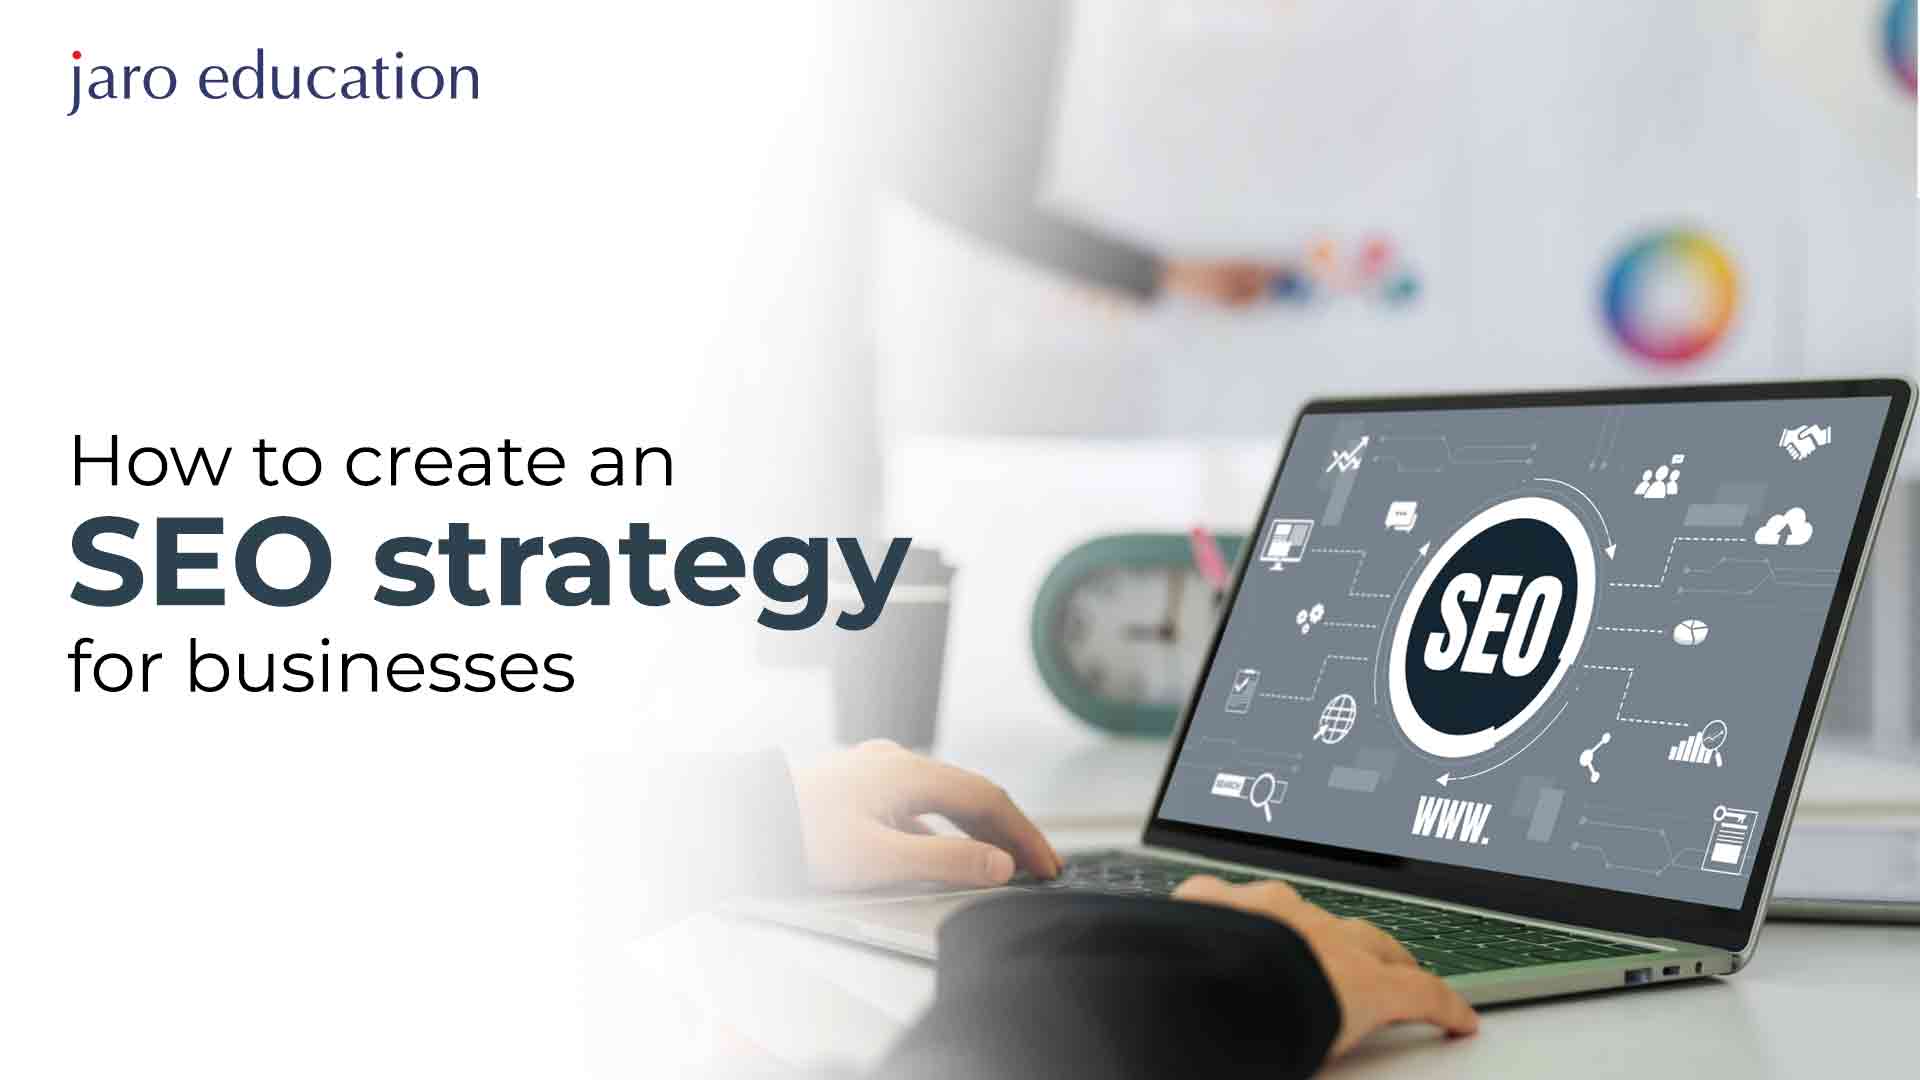 How-to-create-an-SEO-strategy-for-businesses jaro